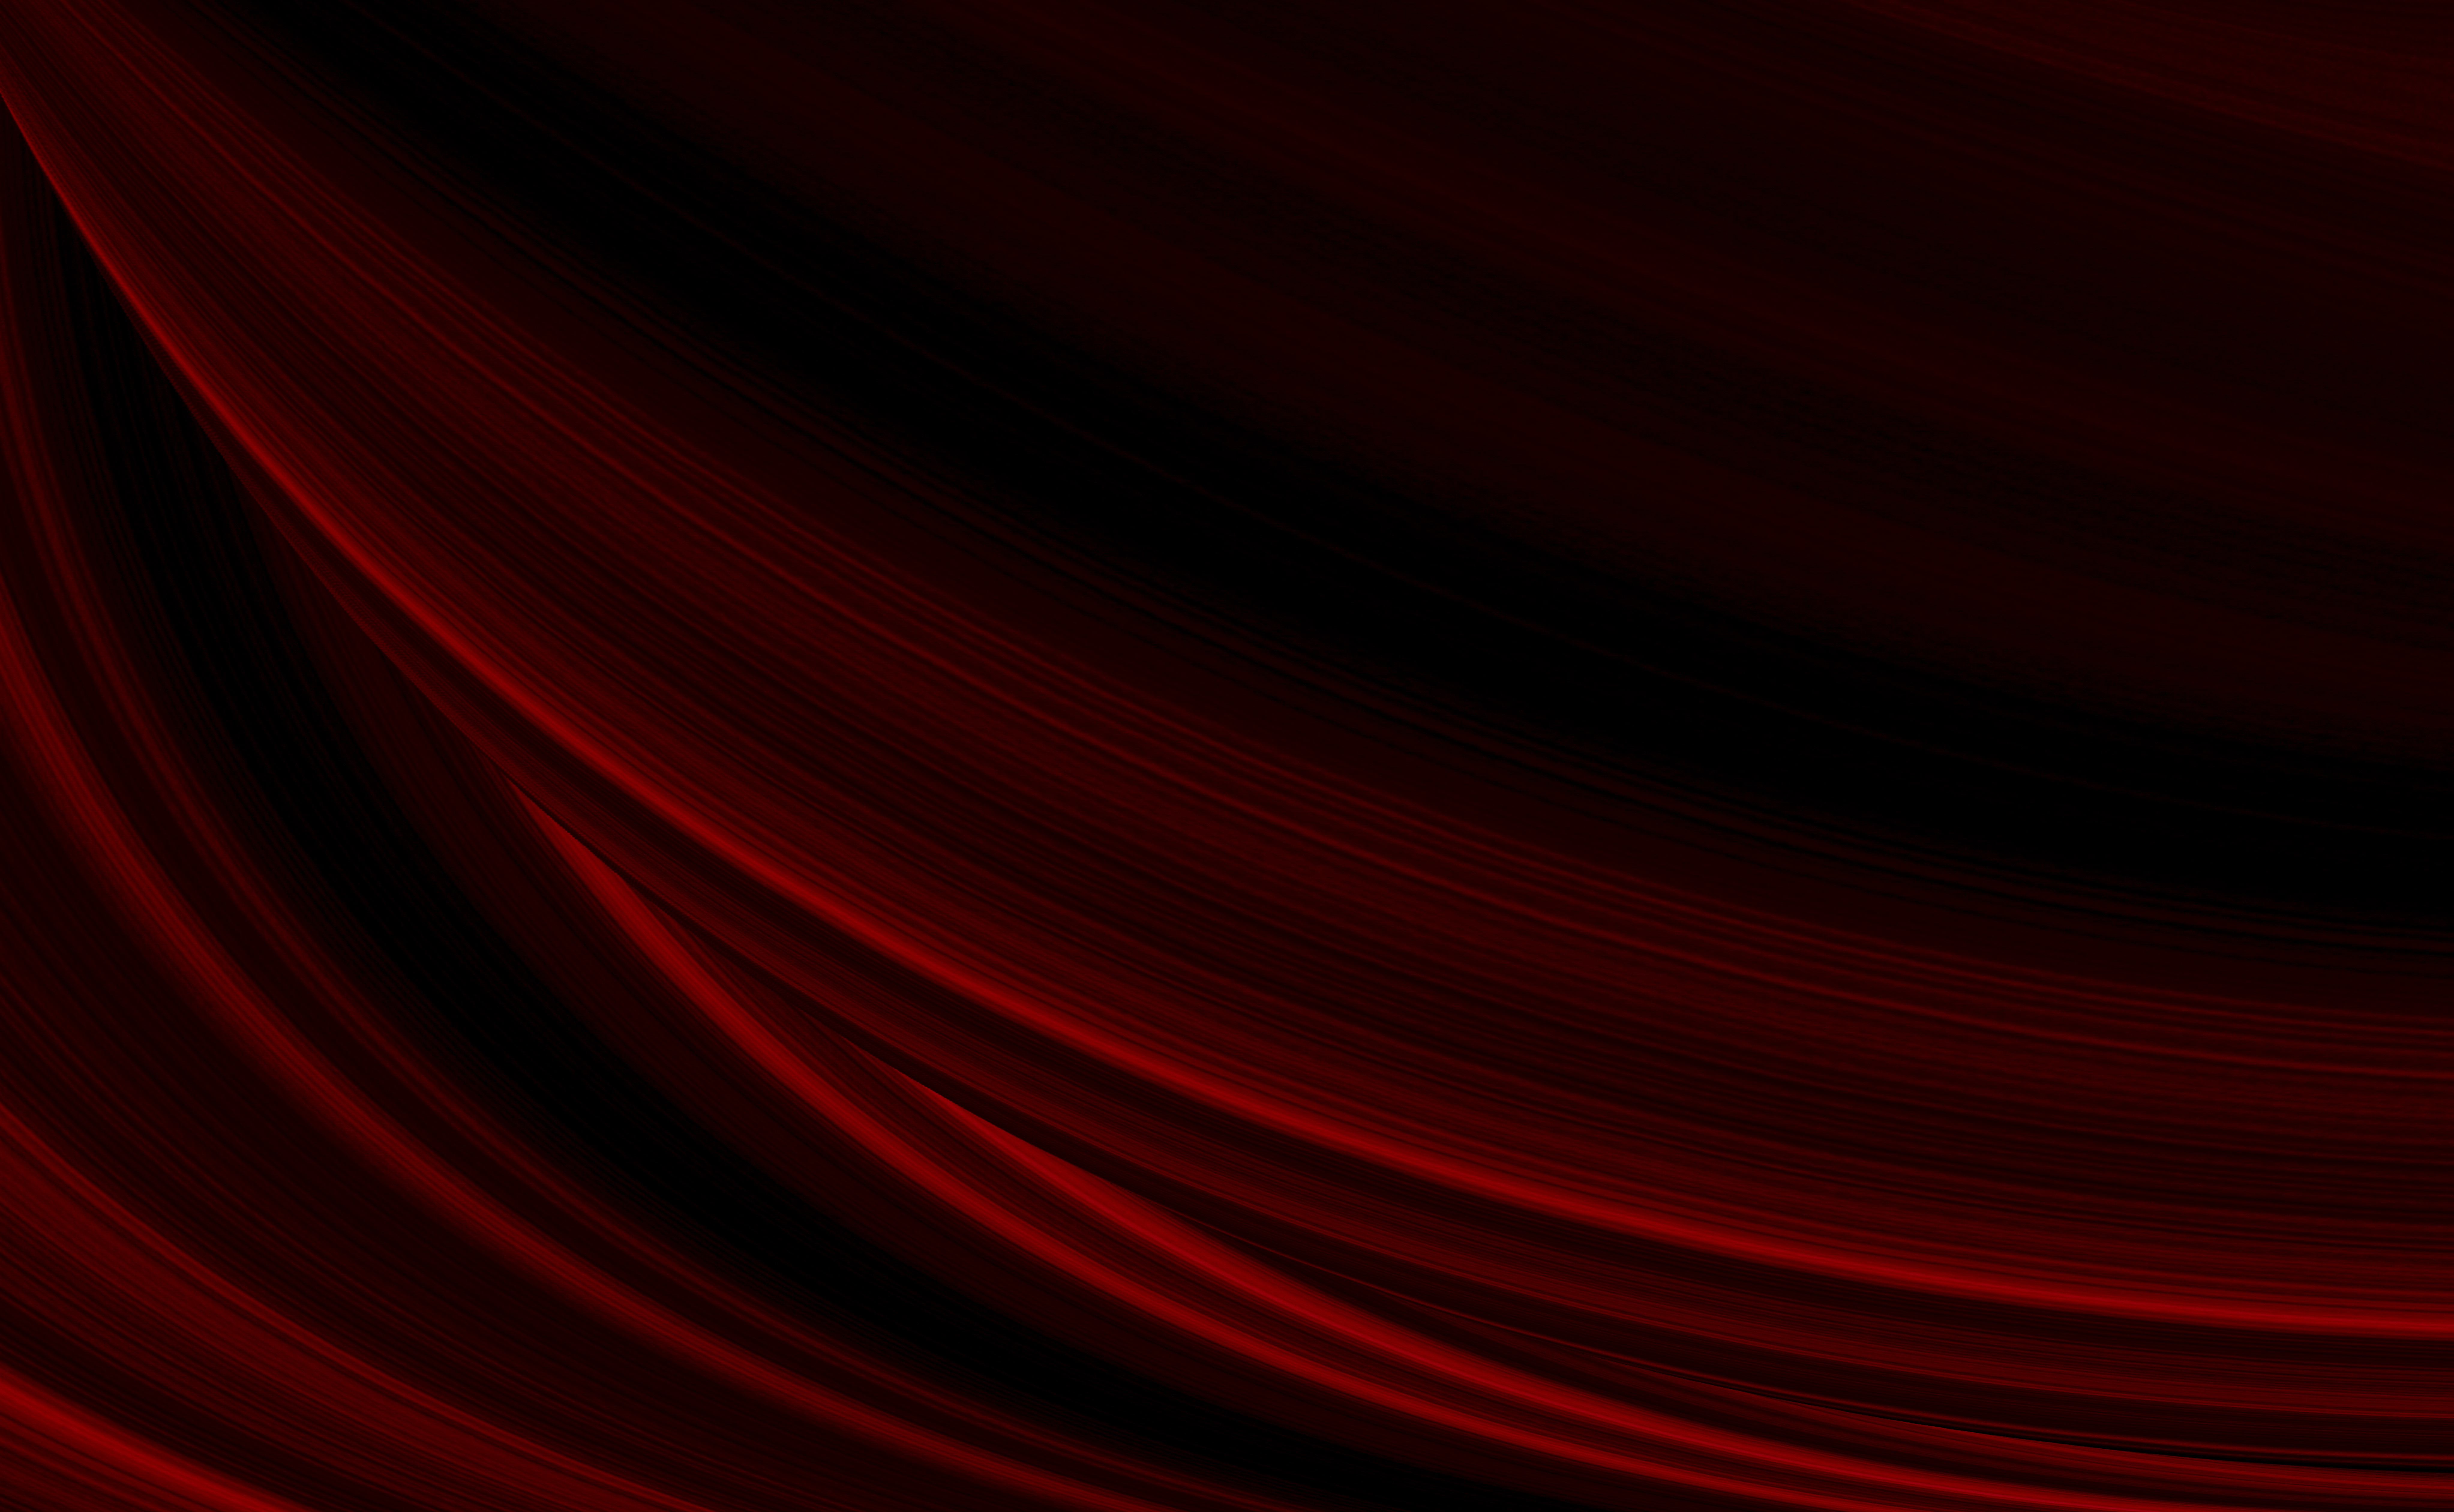 Homepage Background Image - Red